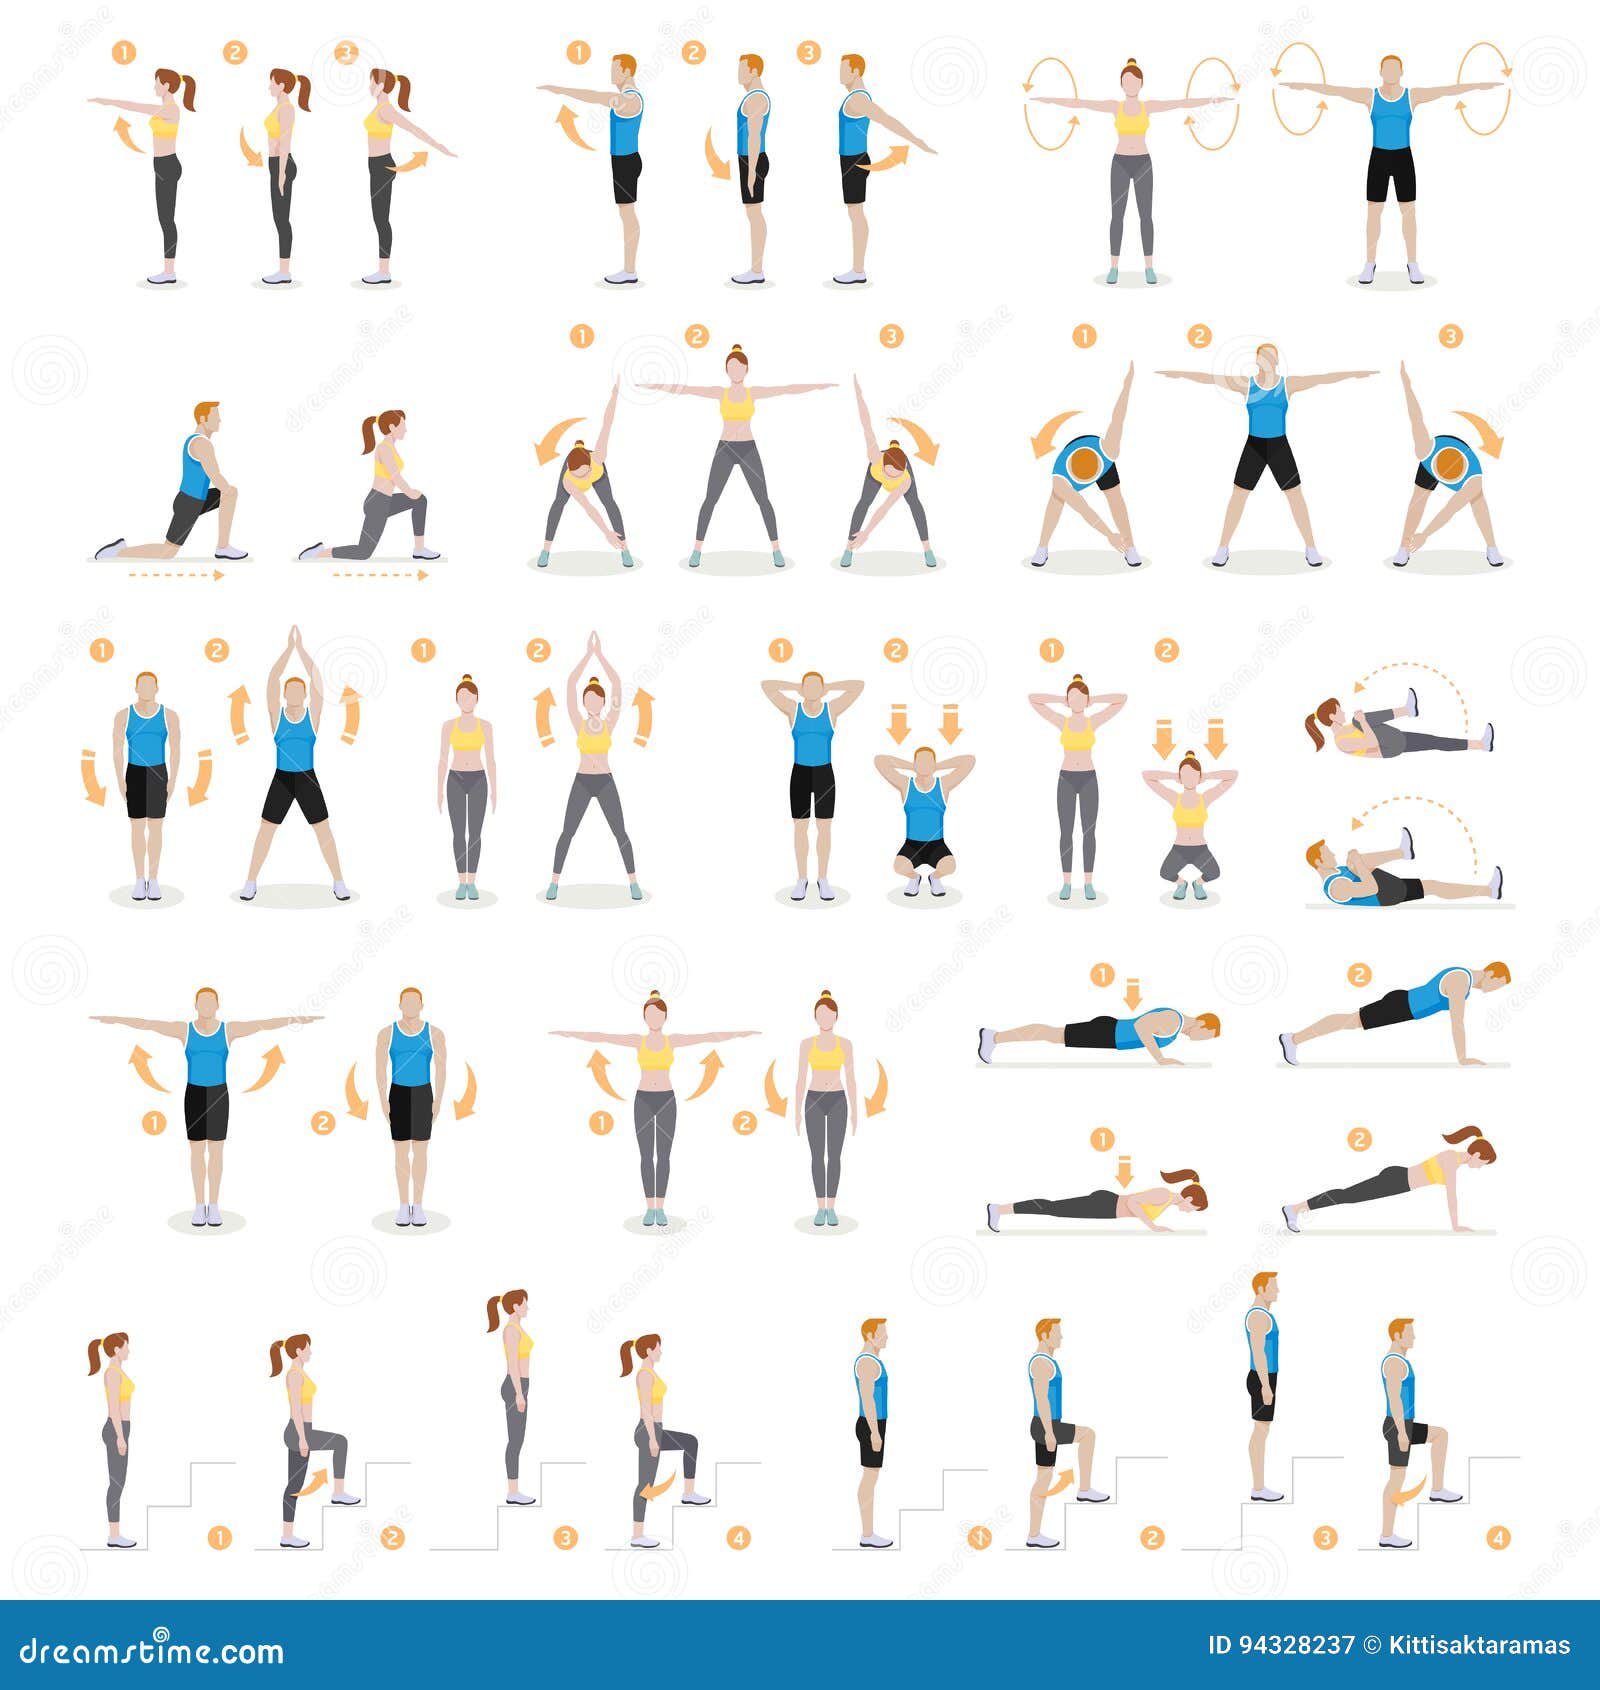 https://thumbs.dreamstime.com/z/man-woman-workout-fitness-aerobic-exercises-vector-illustrations-94328237.jpg